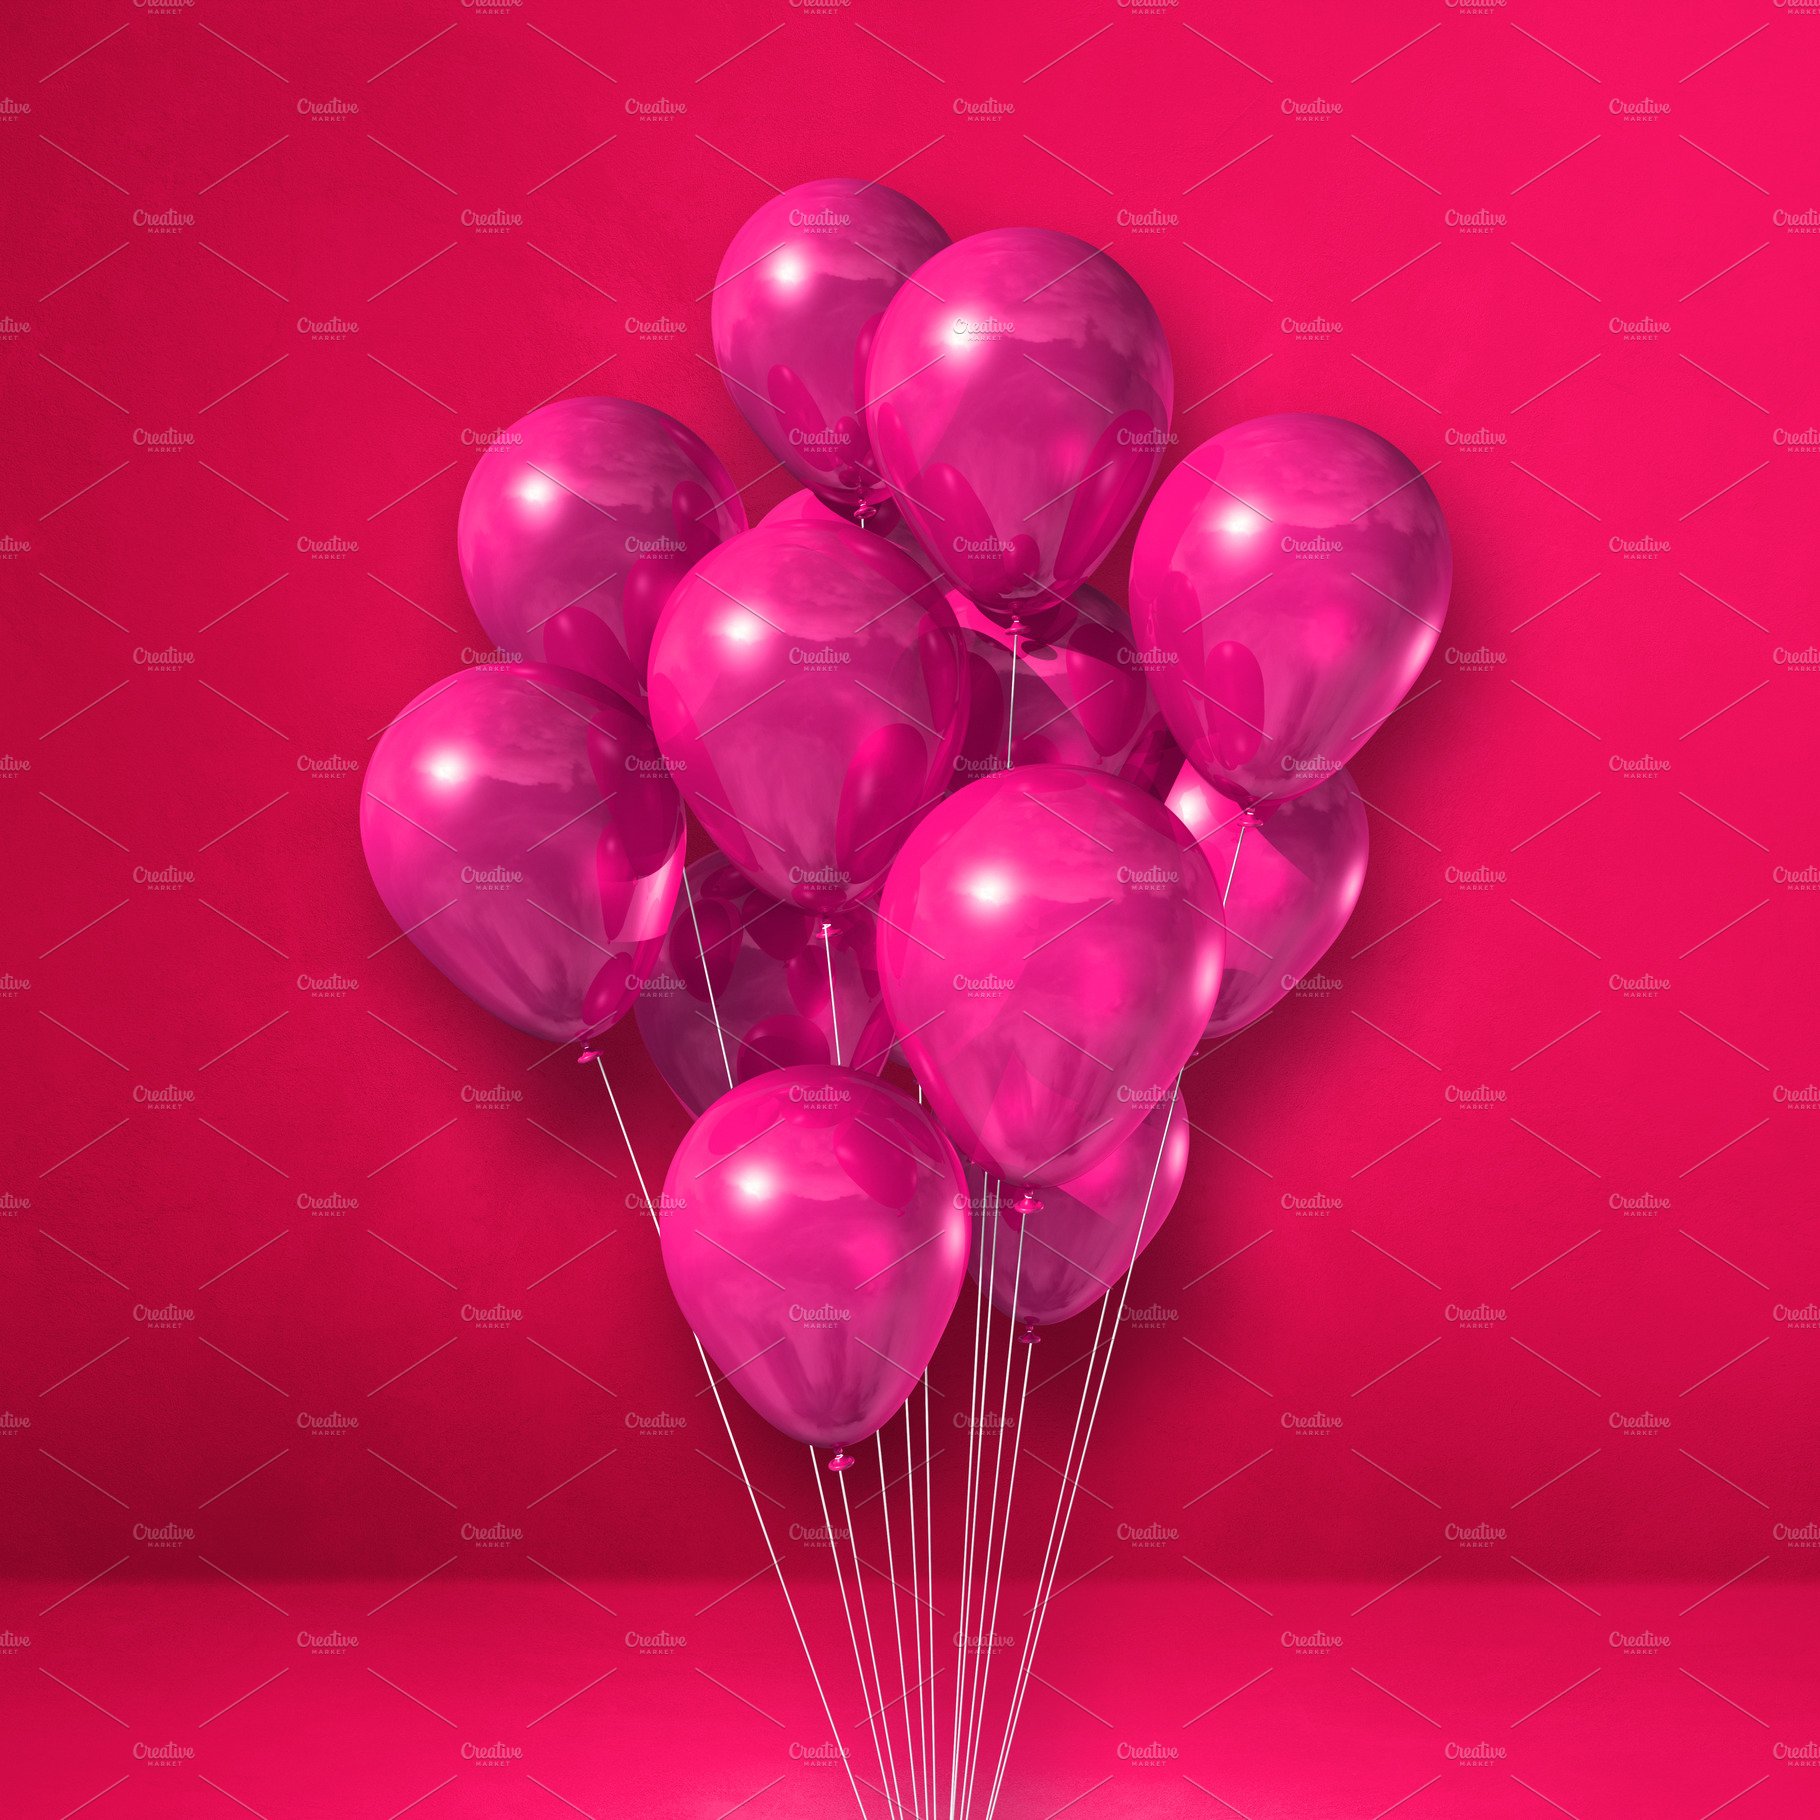 Balloons bunch on a pink wall background cover image.